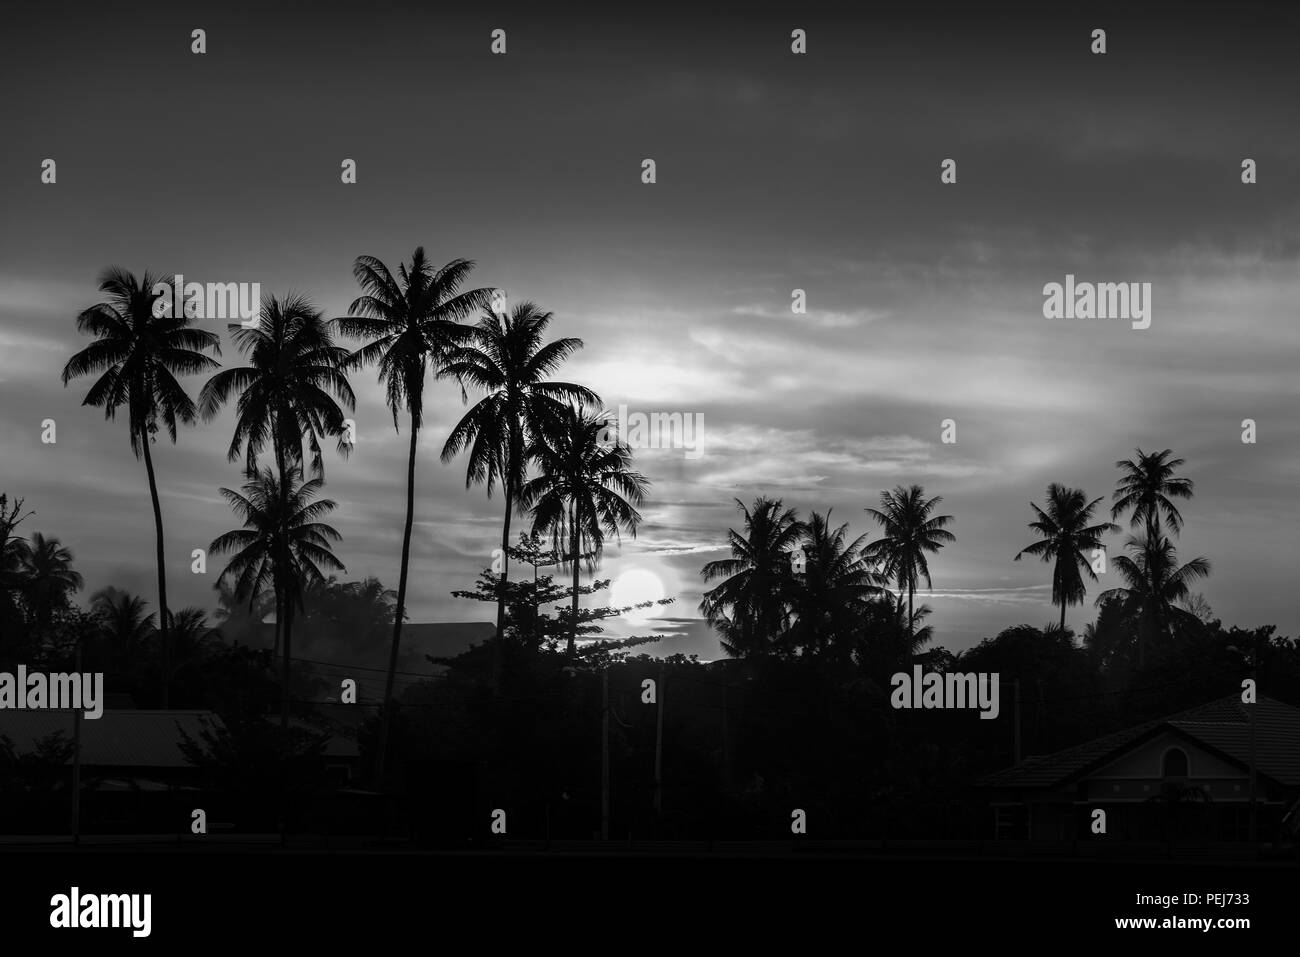 Coconut palm tree silhouettes at sunset Stock Photo